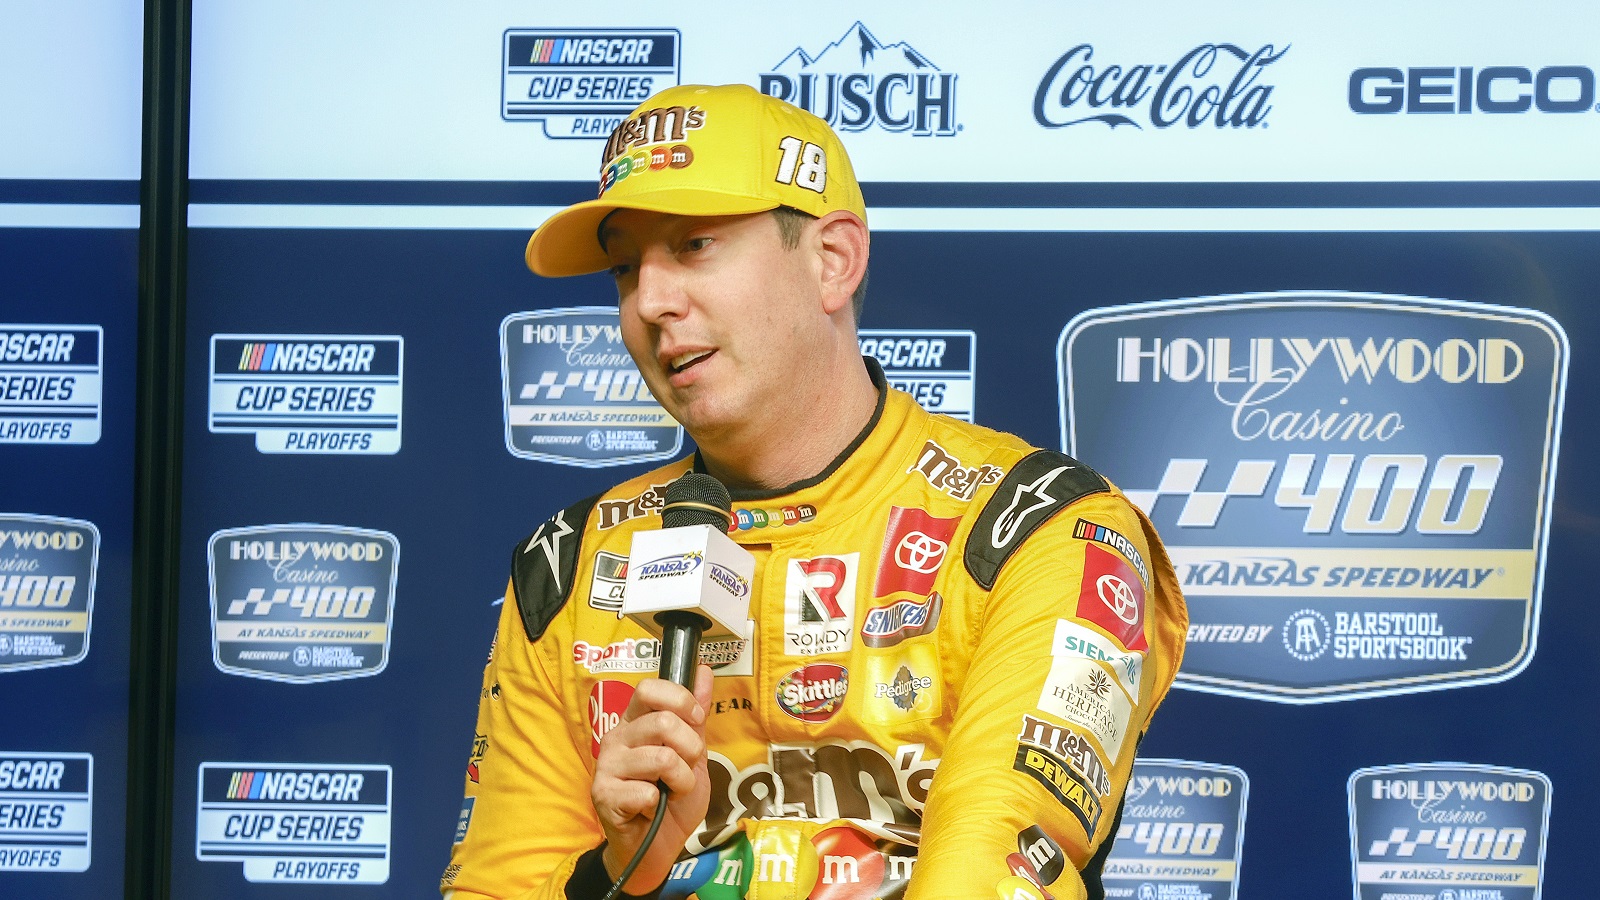 Kyle Busch speaks to the media during a news conference after practice for the NASCAR Cup Series Hollywood Casino 400 at Kansas Speedway on Sept. 10, 2022.